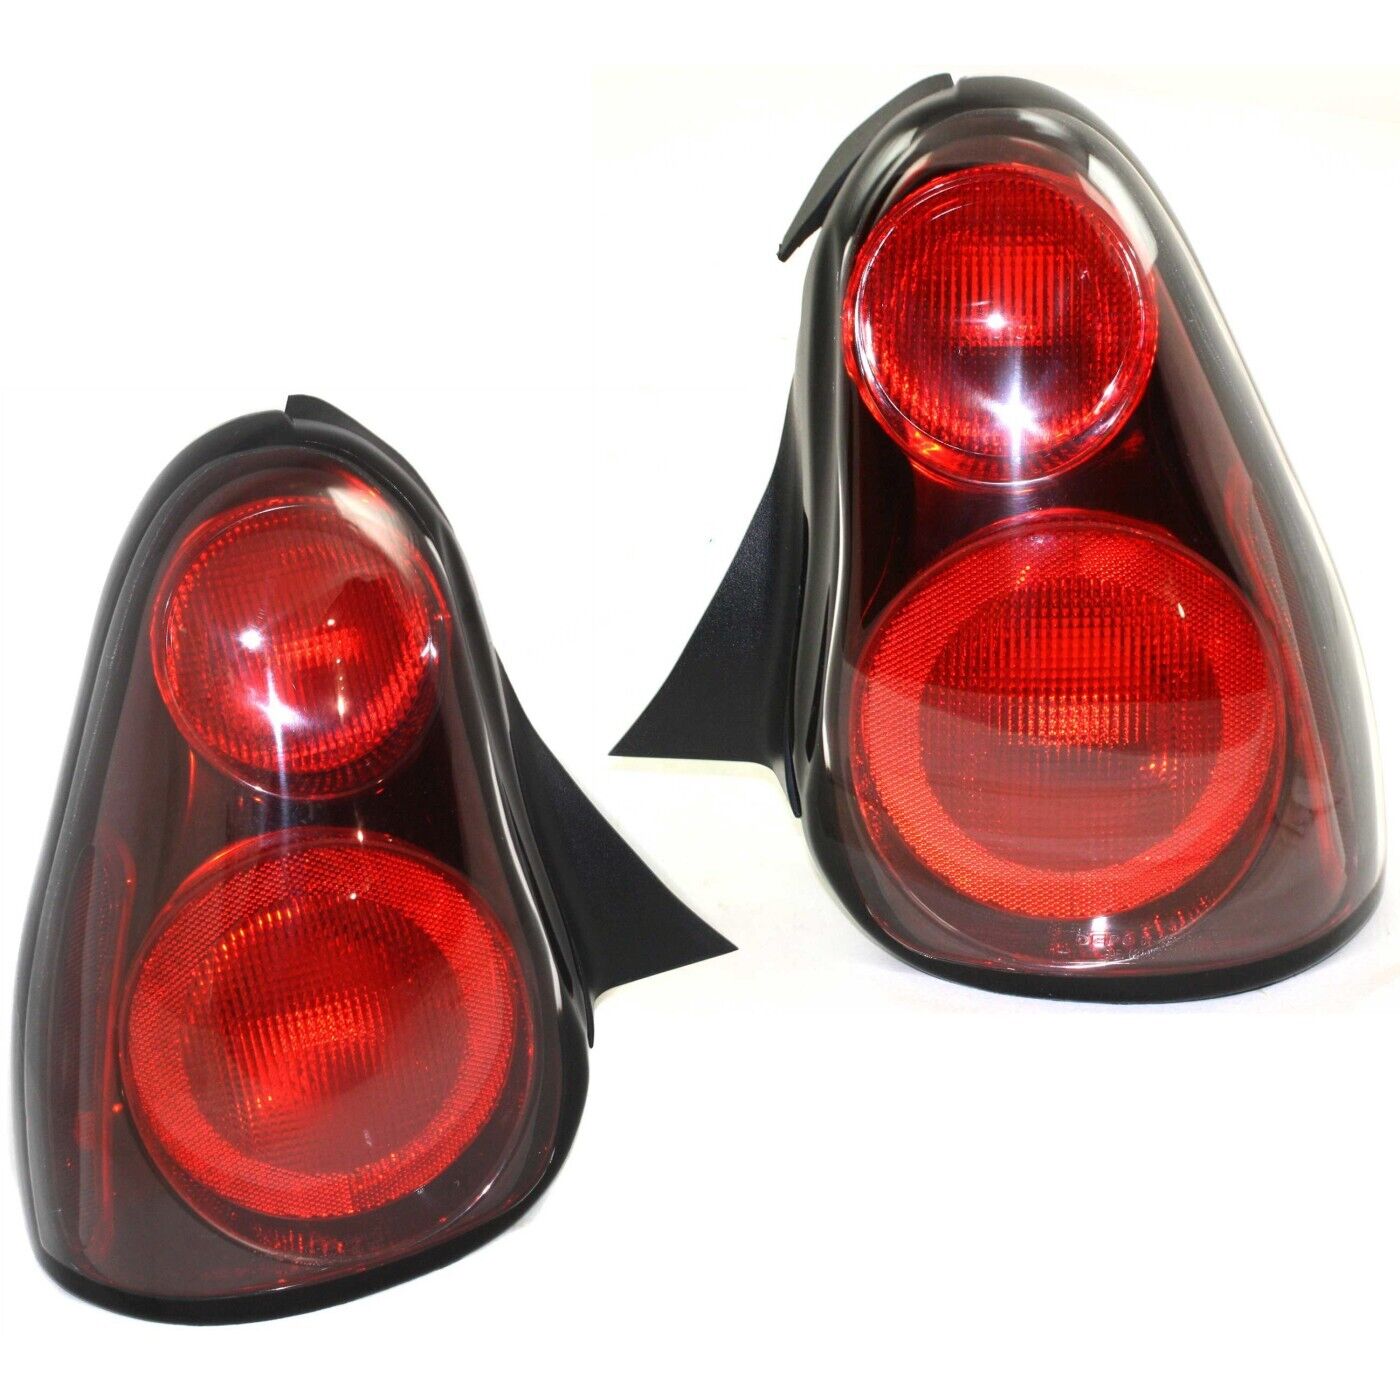 Set of 2 Tail Light For 2000-2005 Chevrolet Monte Carlo SS LH & RH